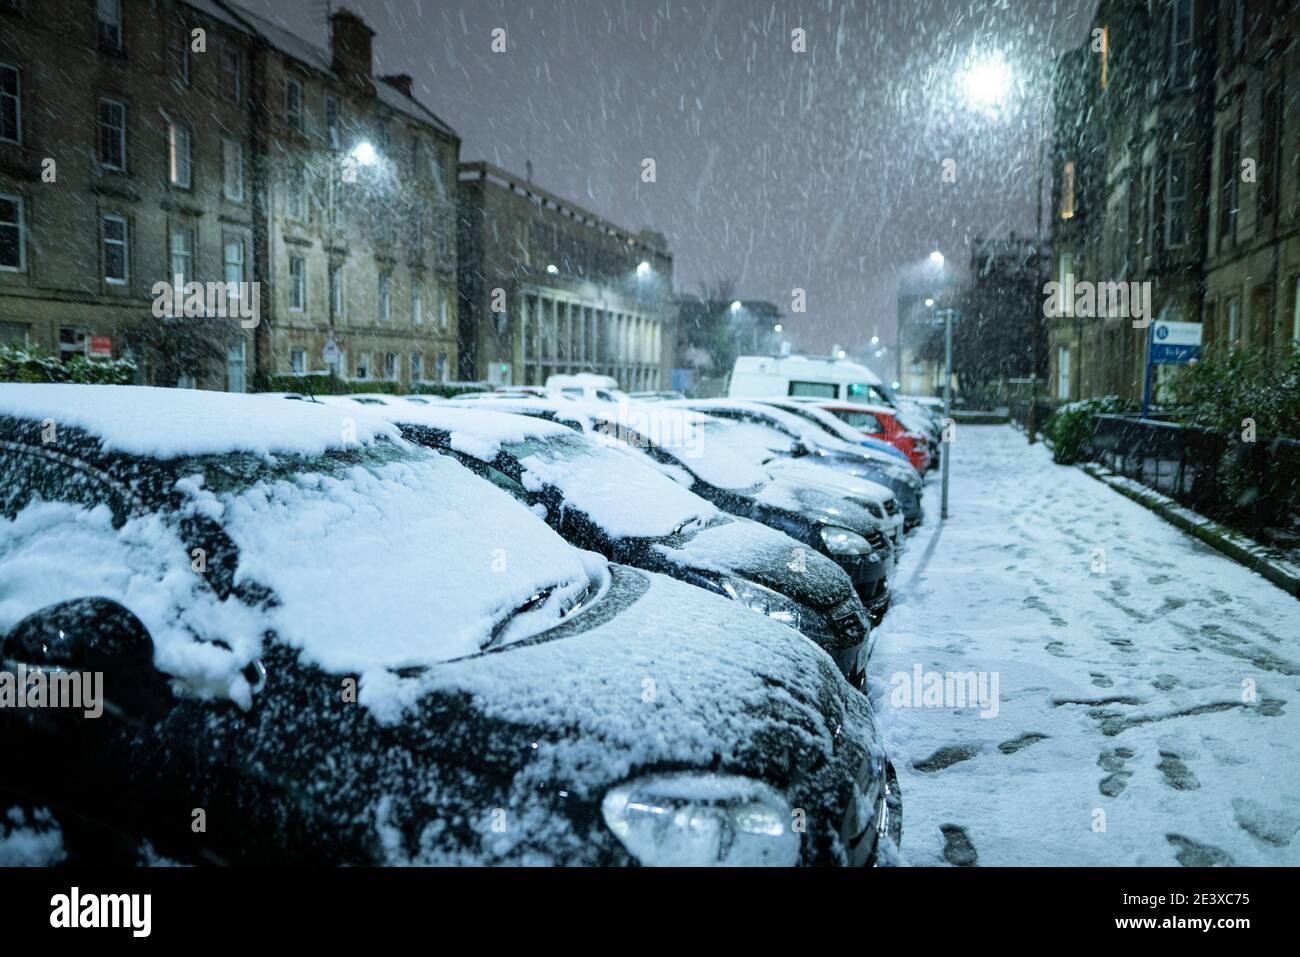 Edinburgh, Scotland, UK. 21 January 2021. Scenes taken between 4am and 5am in Edinburgh city centre after overnight snowfall. Pic; Cars covered in snow in the New Town. Iain Masterton/Alamy Live News Stock Photo